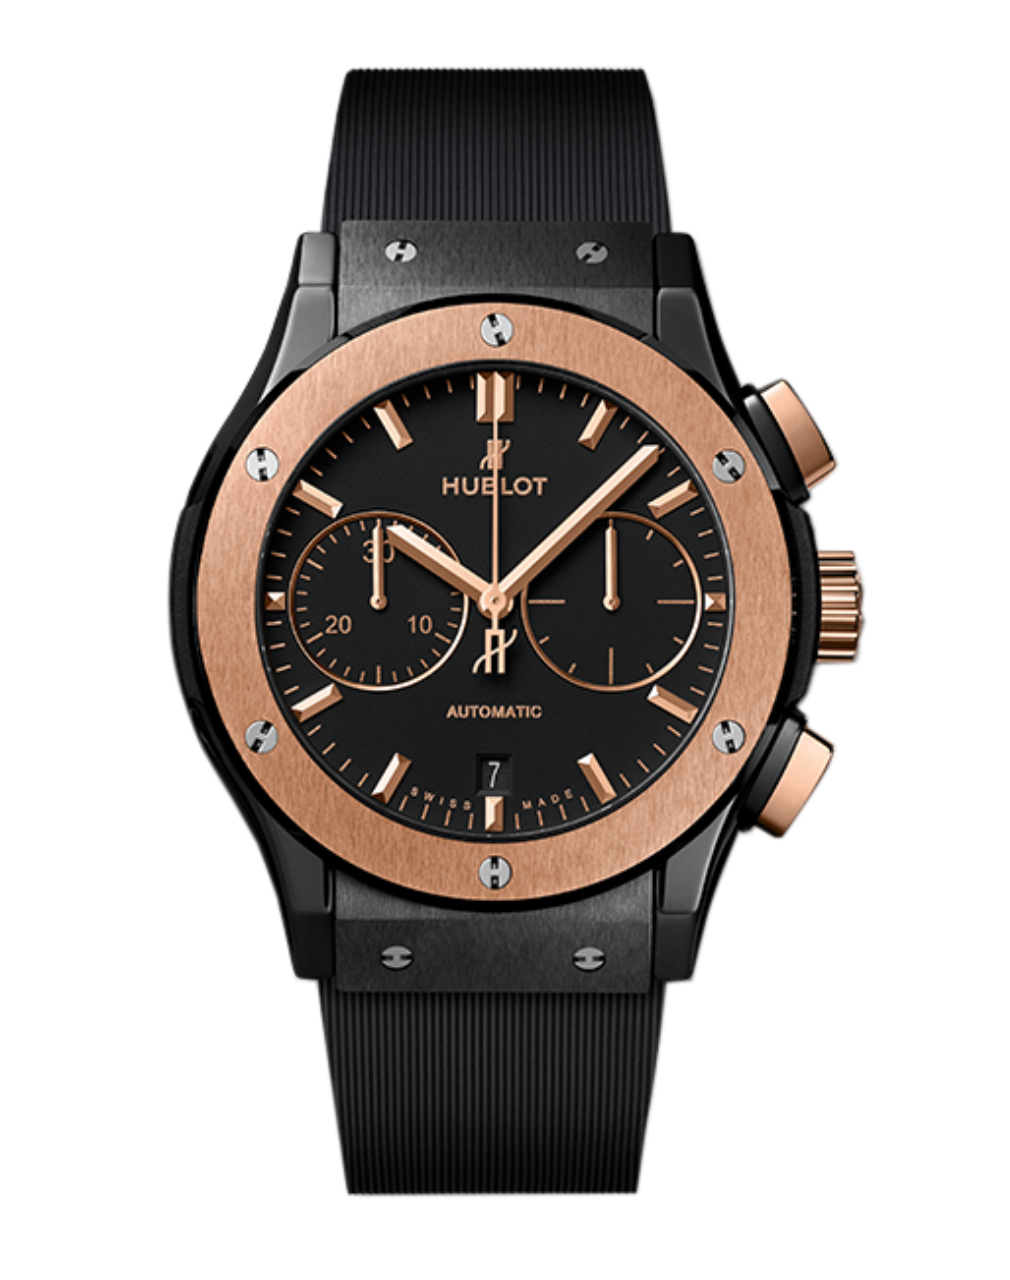 Hublot | Classic Fusion | Official Retailer | The Hour Glass Official